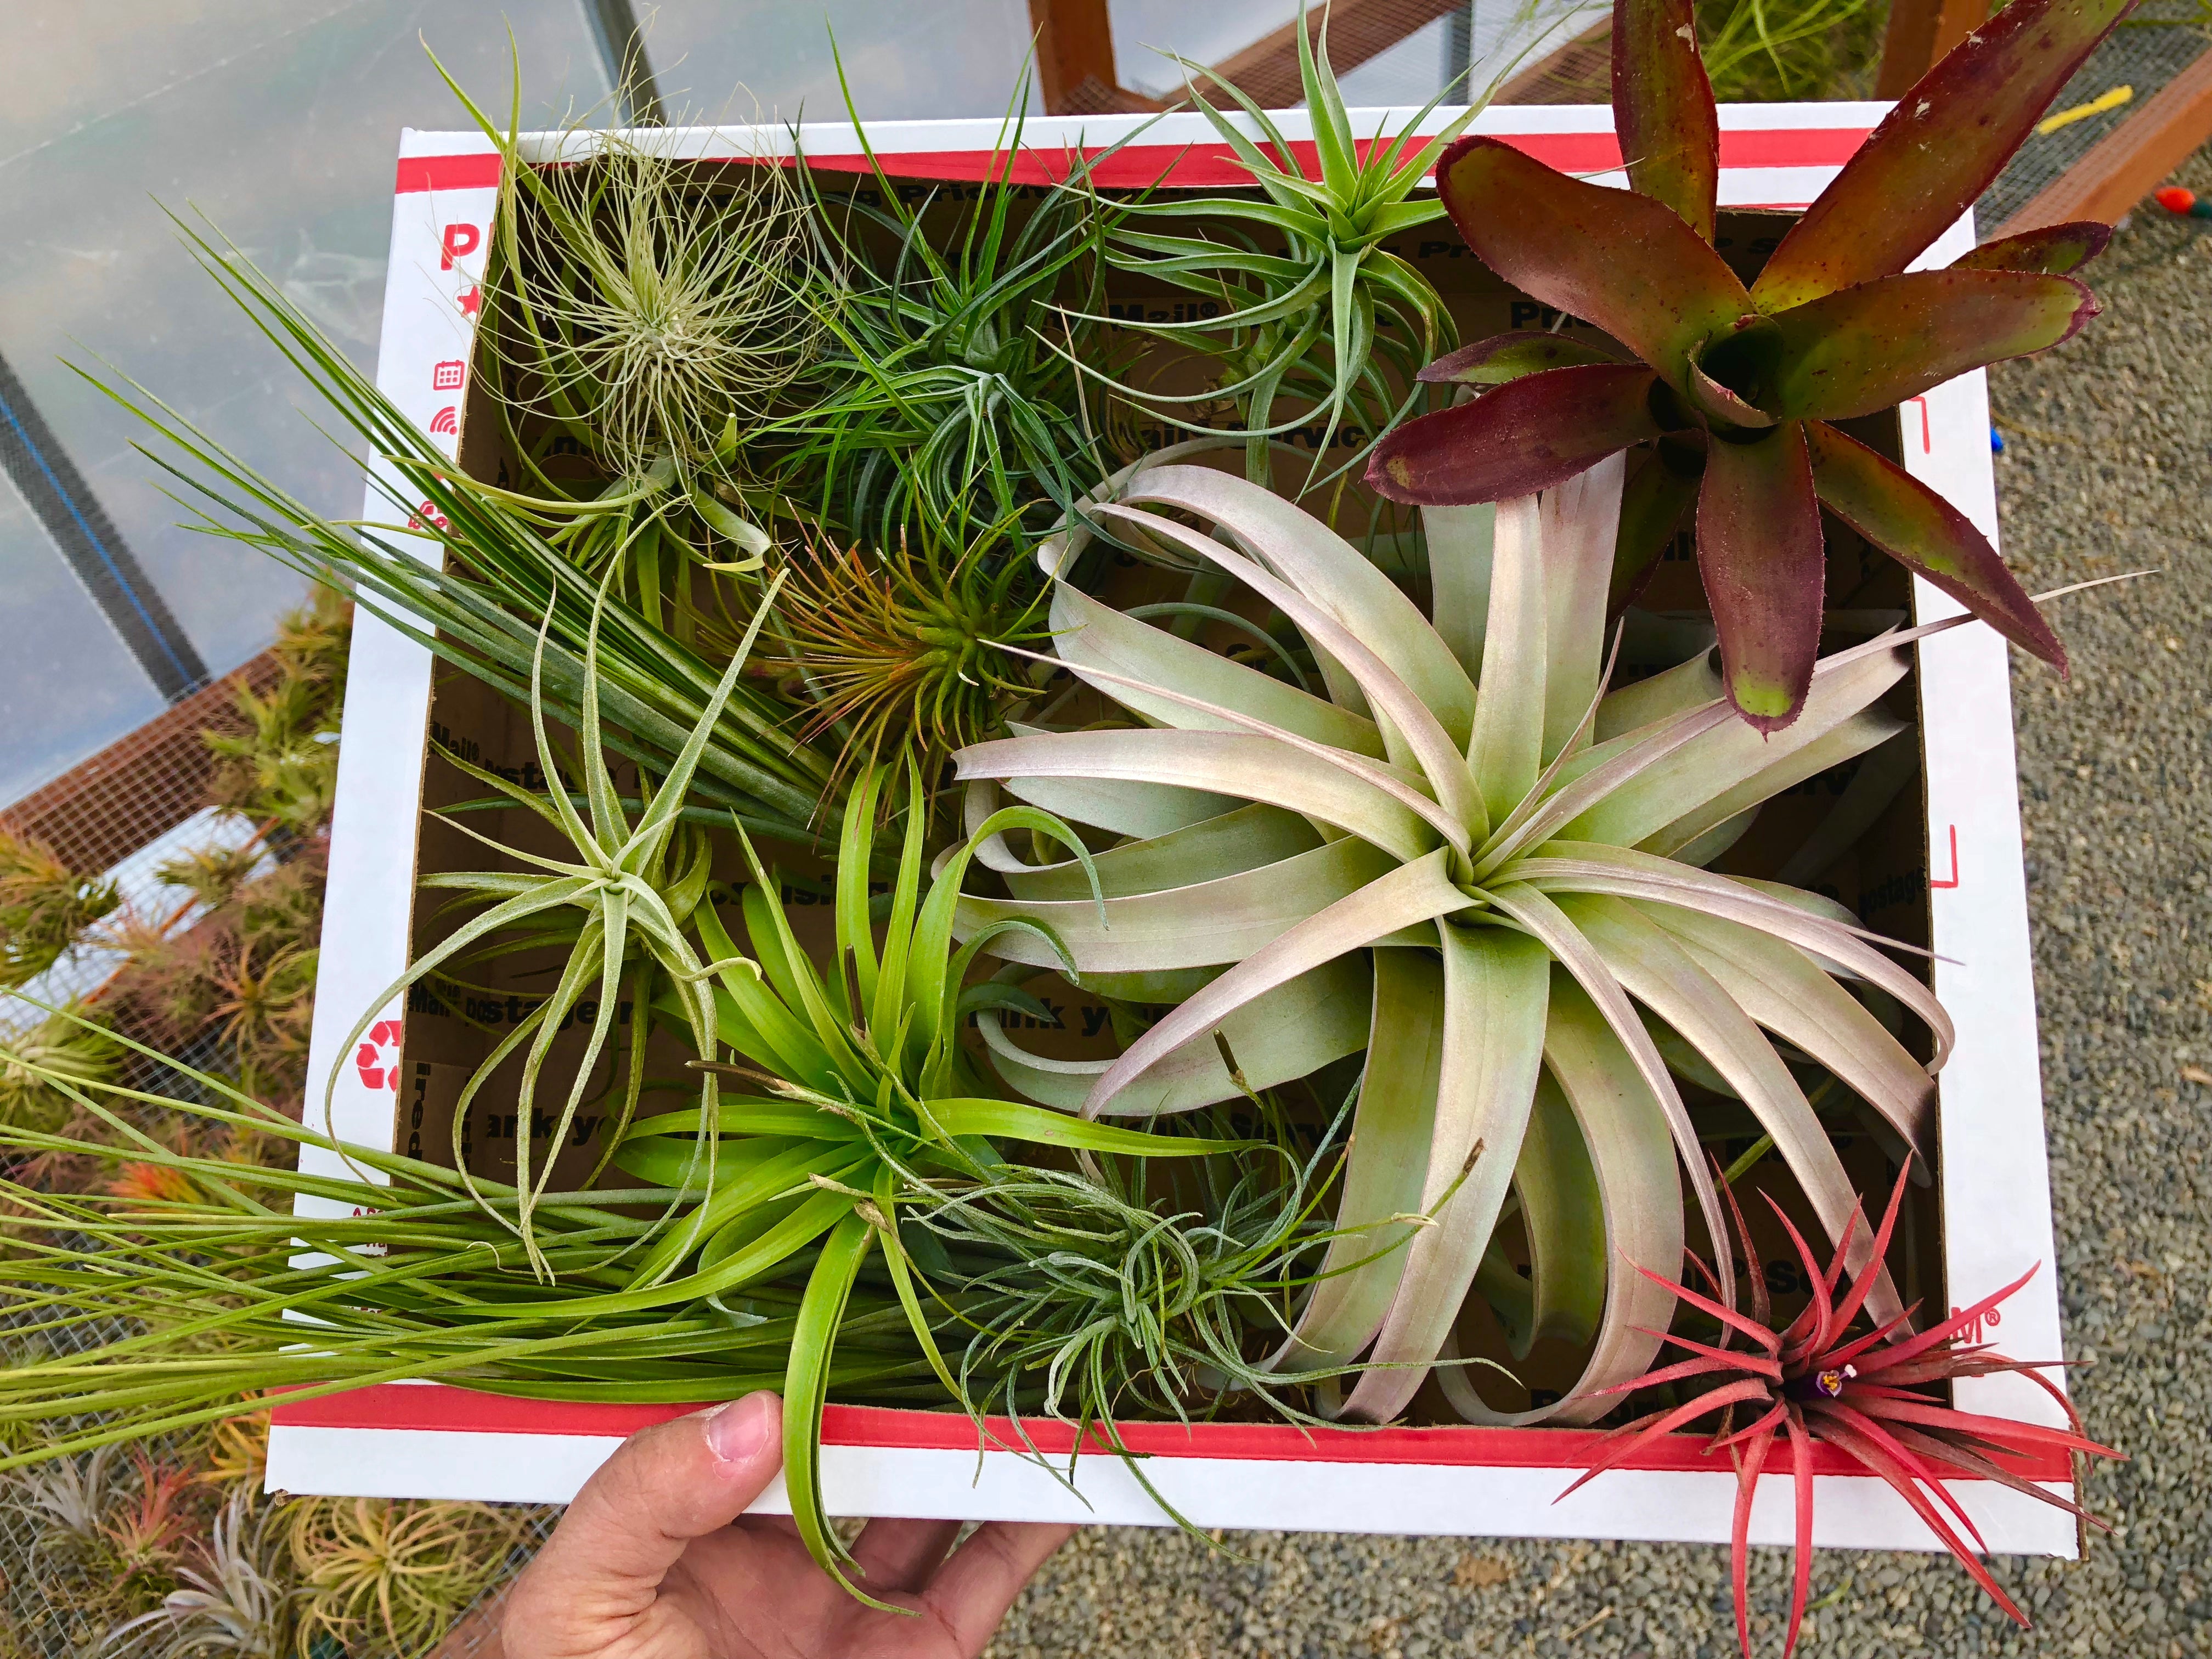 Plants In A Box